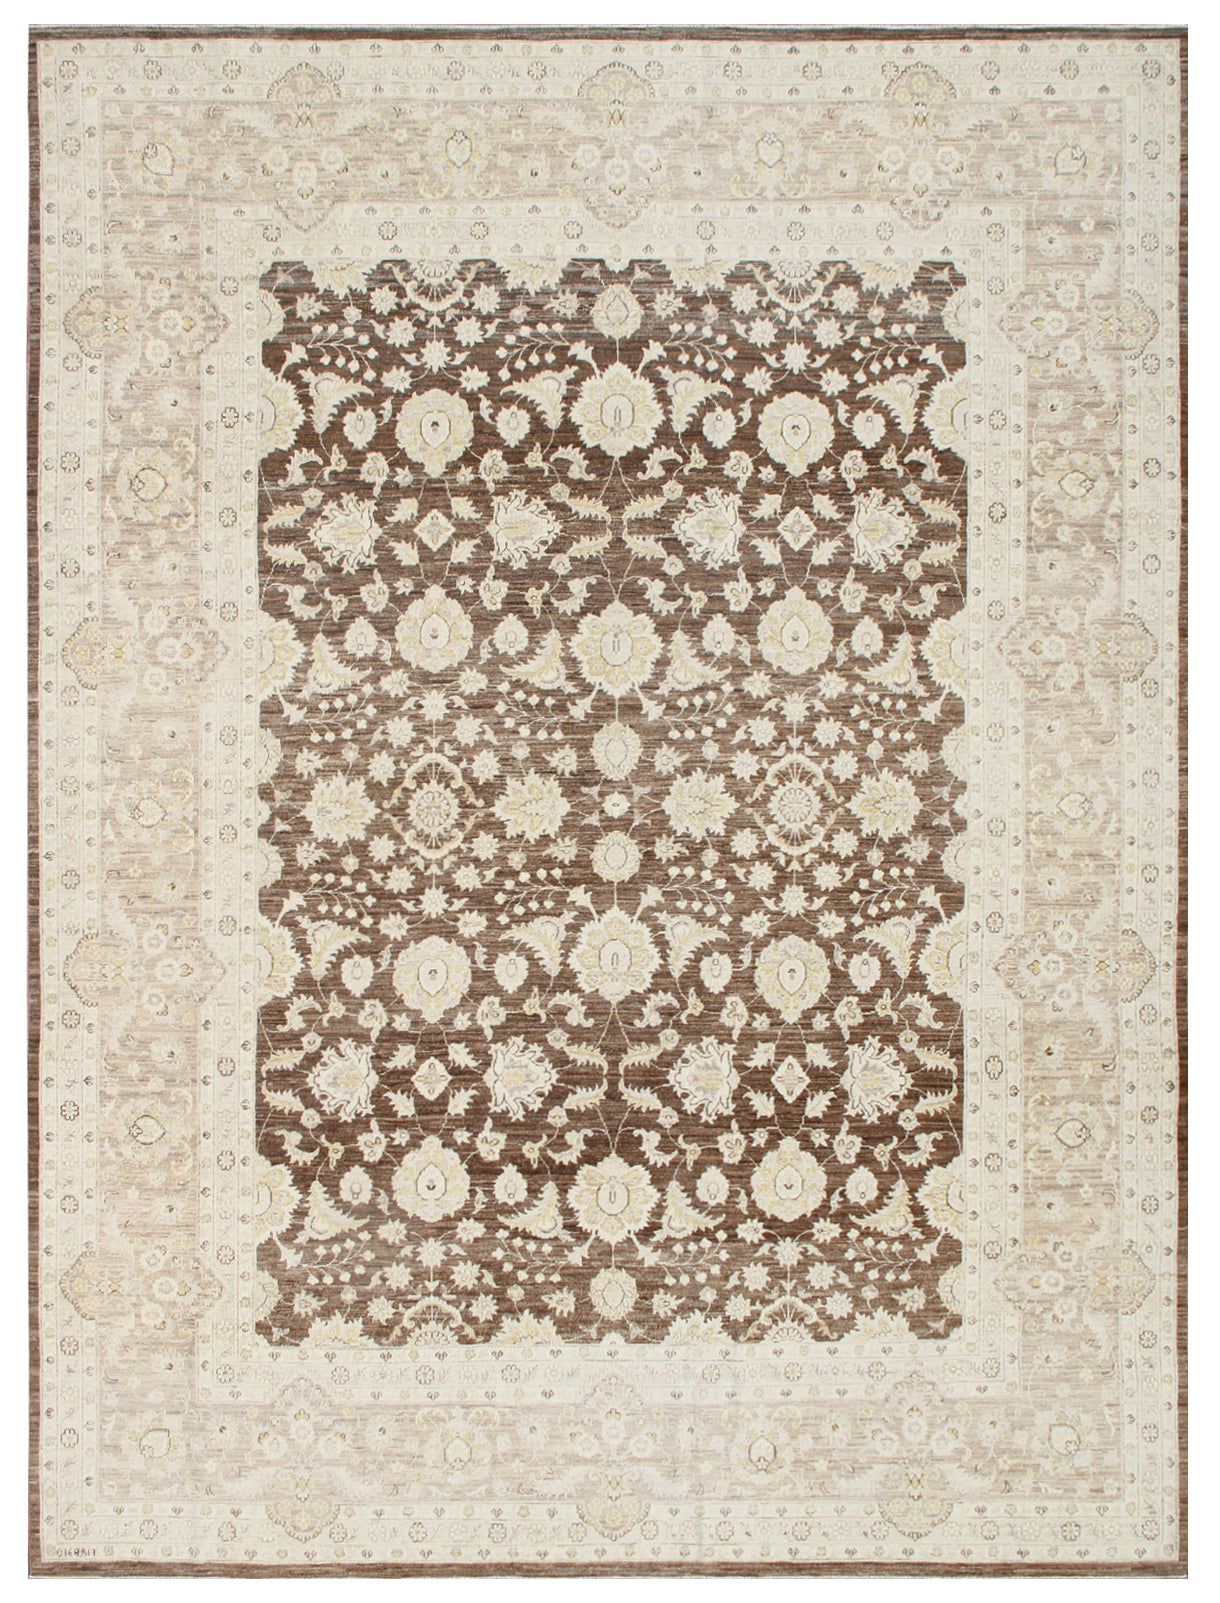 8'x10' Brown And Beige Floral Persian Design Ariana Transitional Area Rug